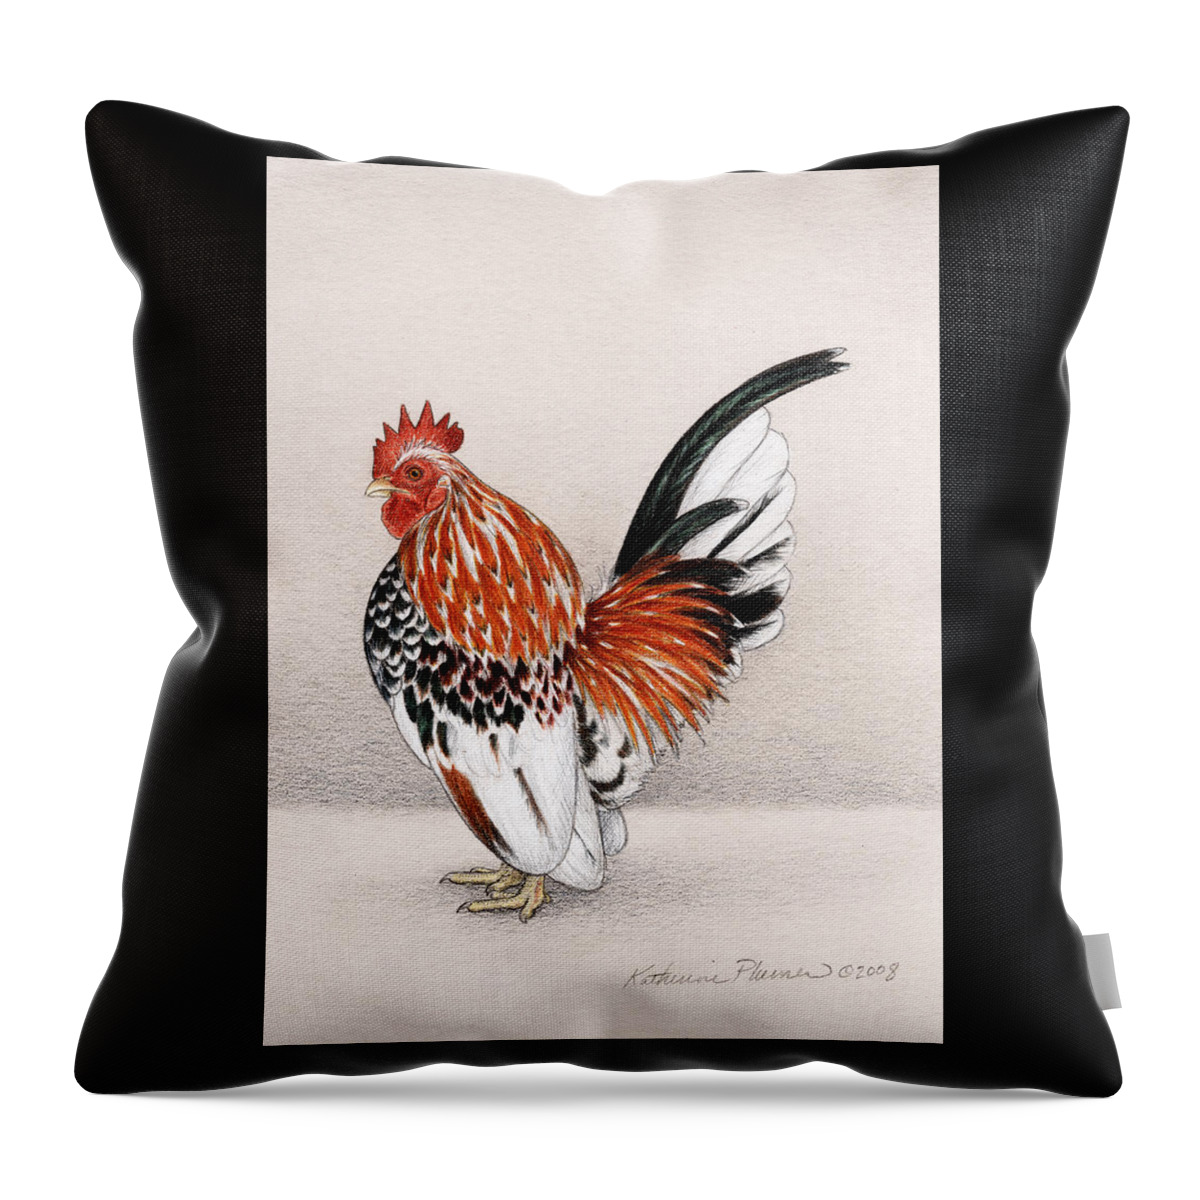 Rooster Throw Pillow featuring the drawing Vichi by Katherine Plumer